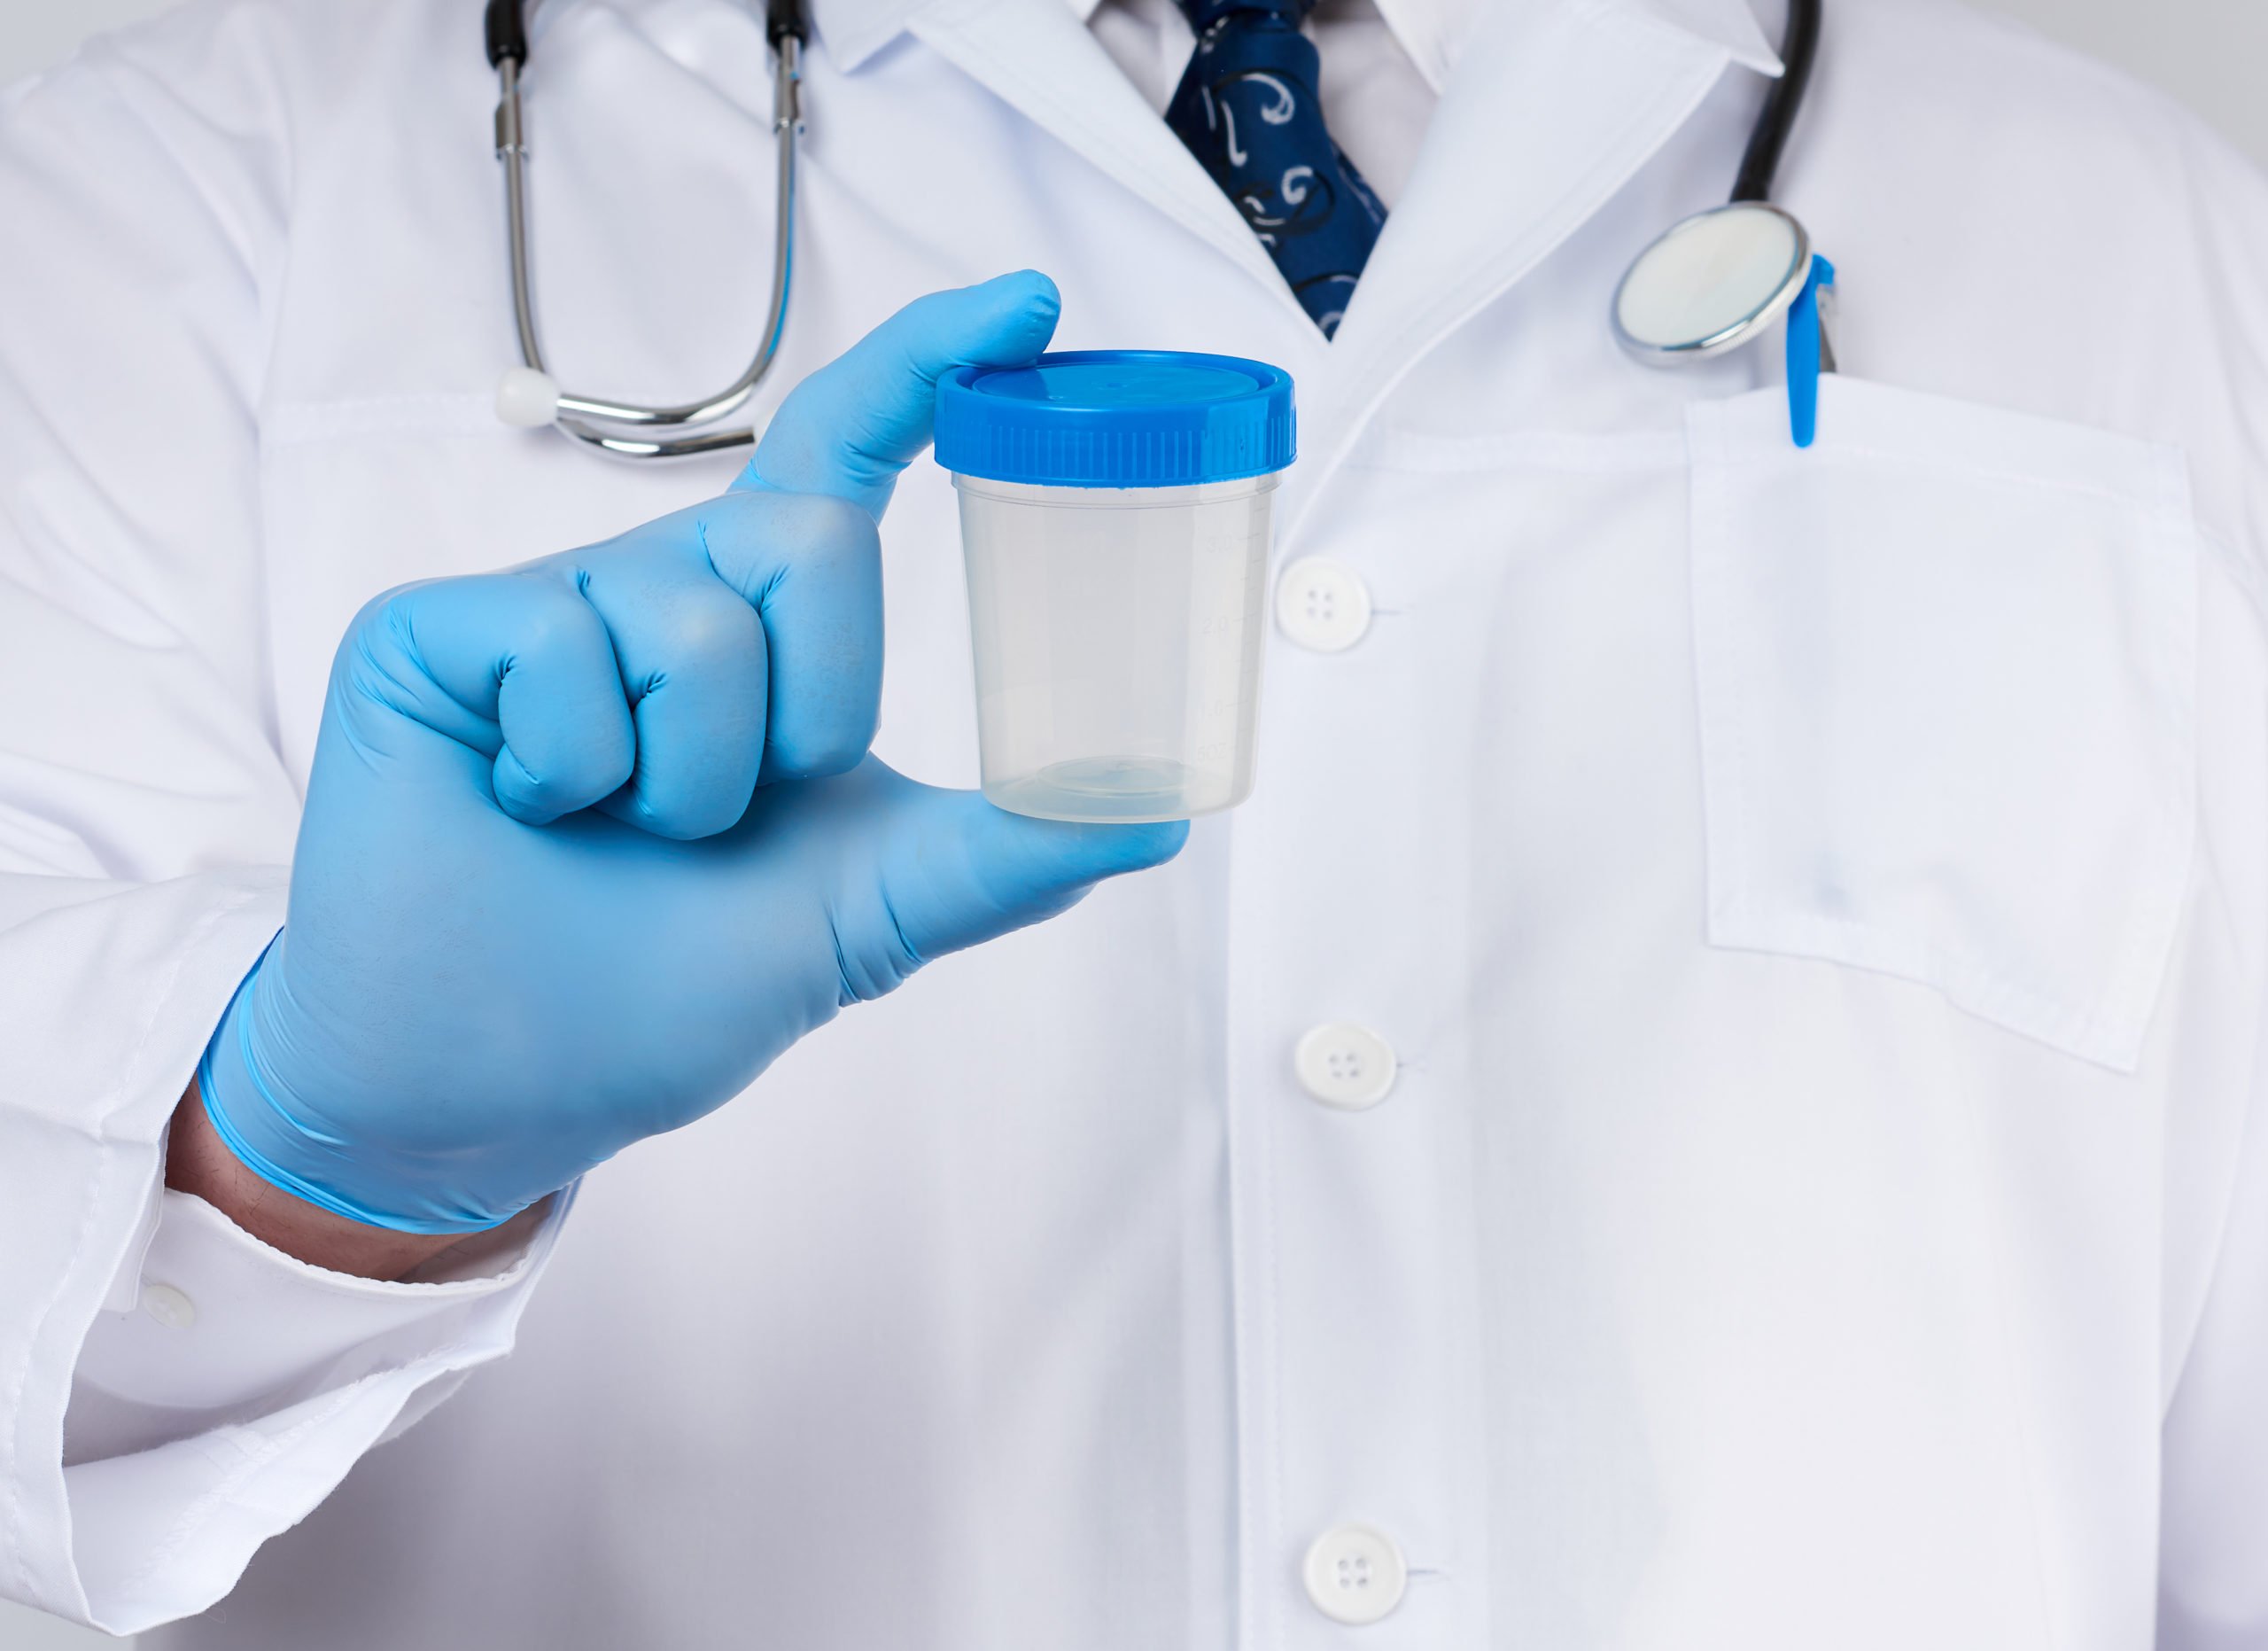 doctor in a white coat and tie stands and holds a plastic container for urine specimen